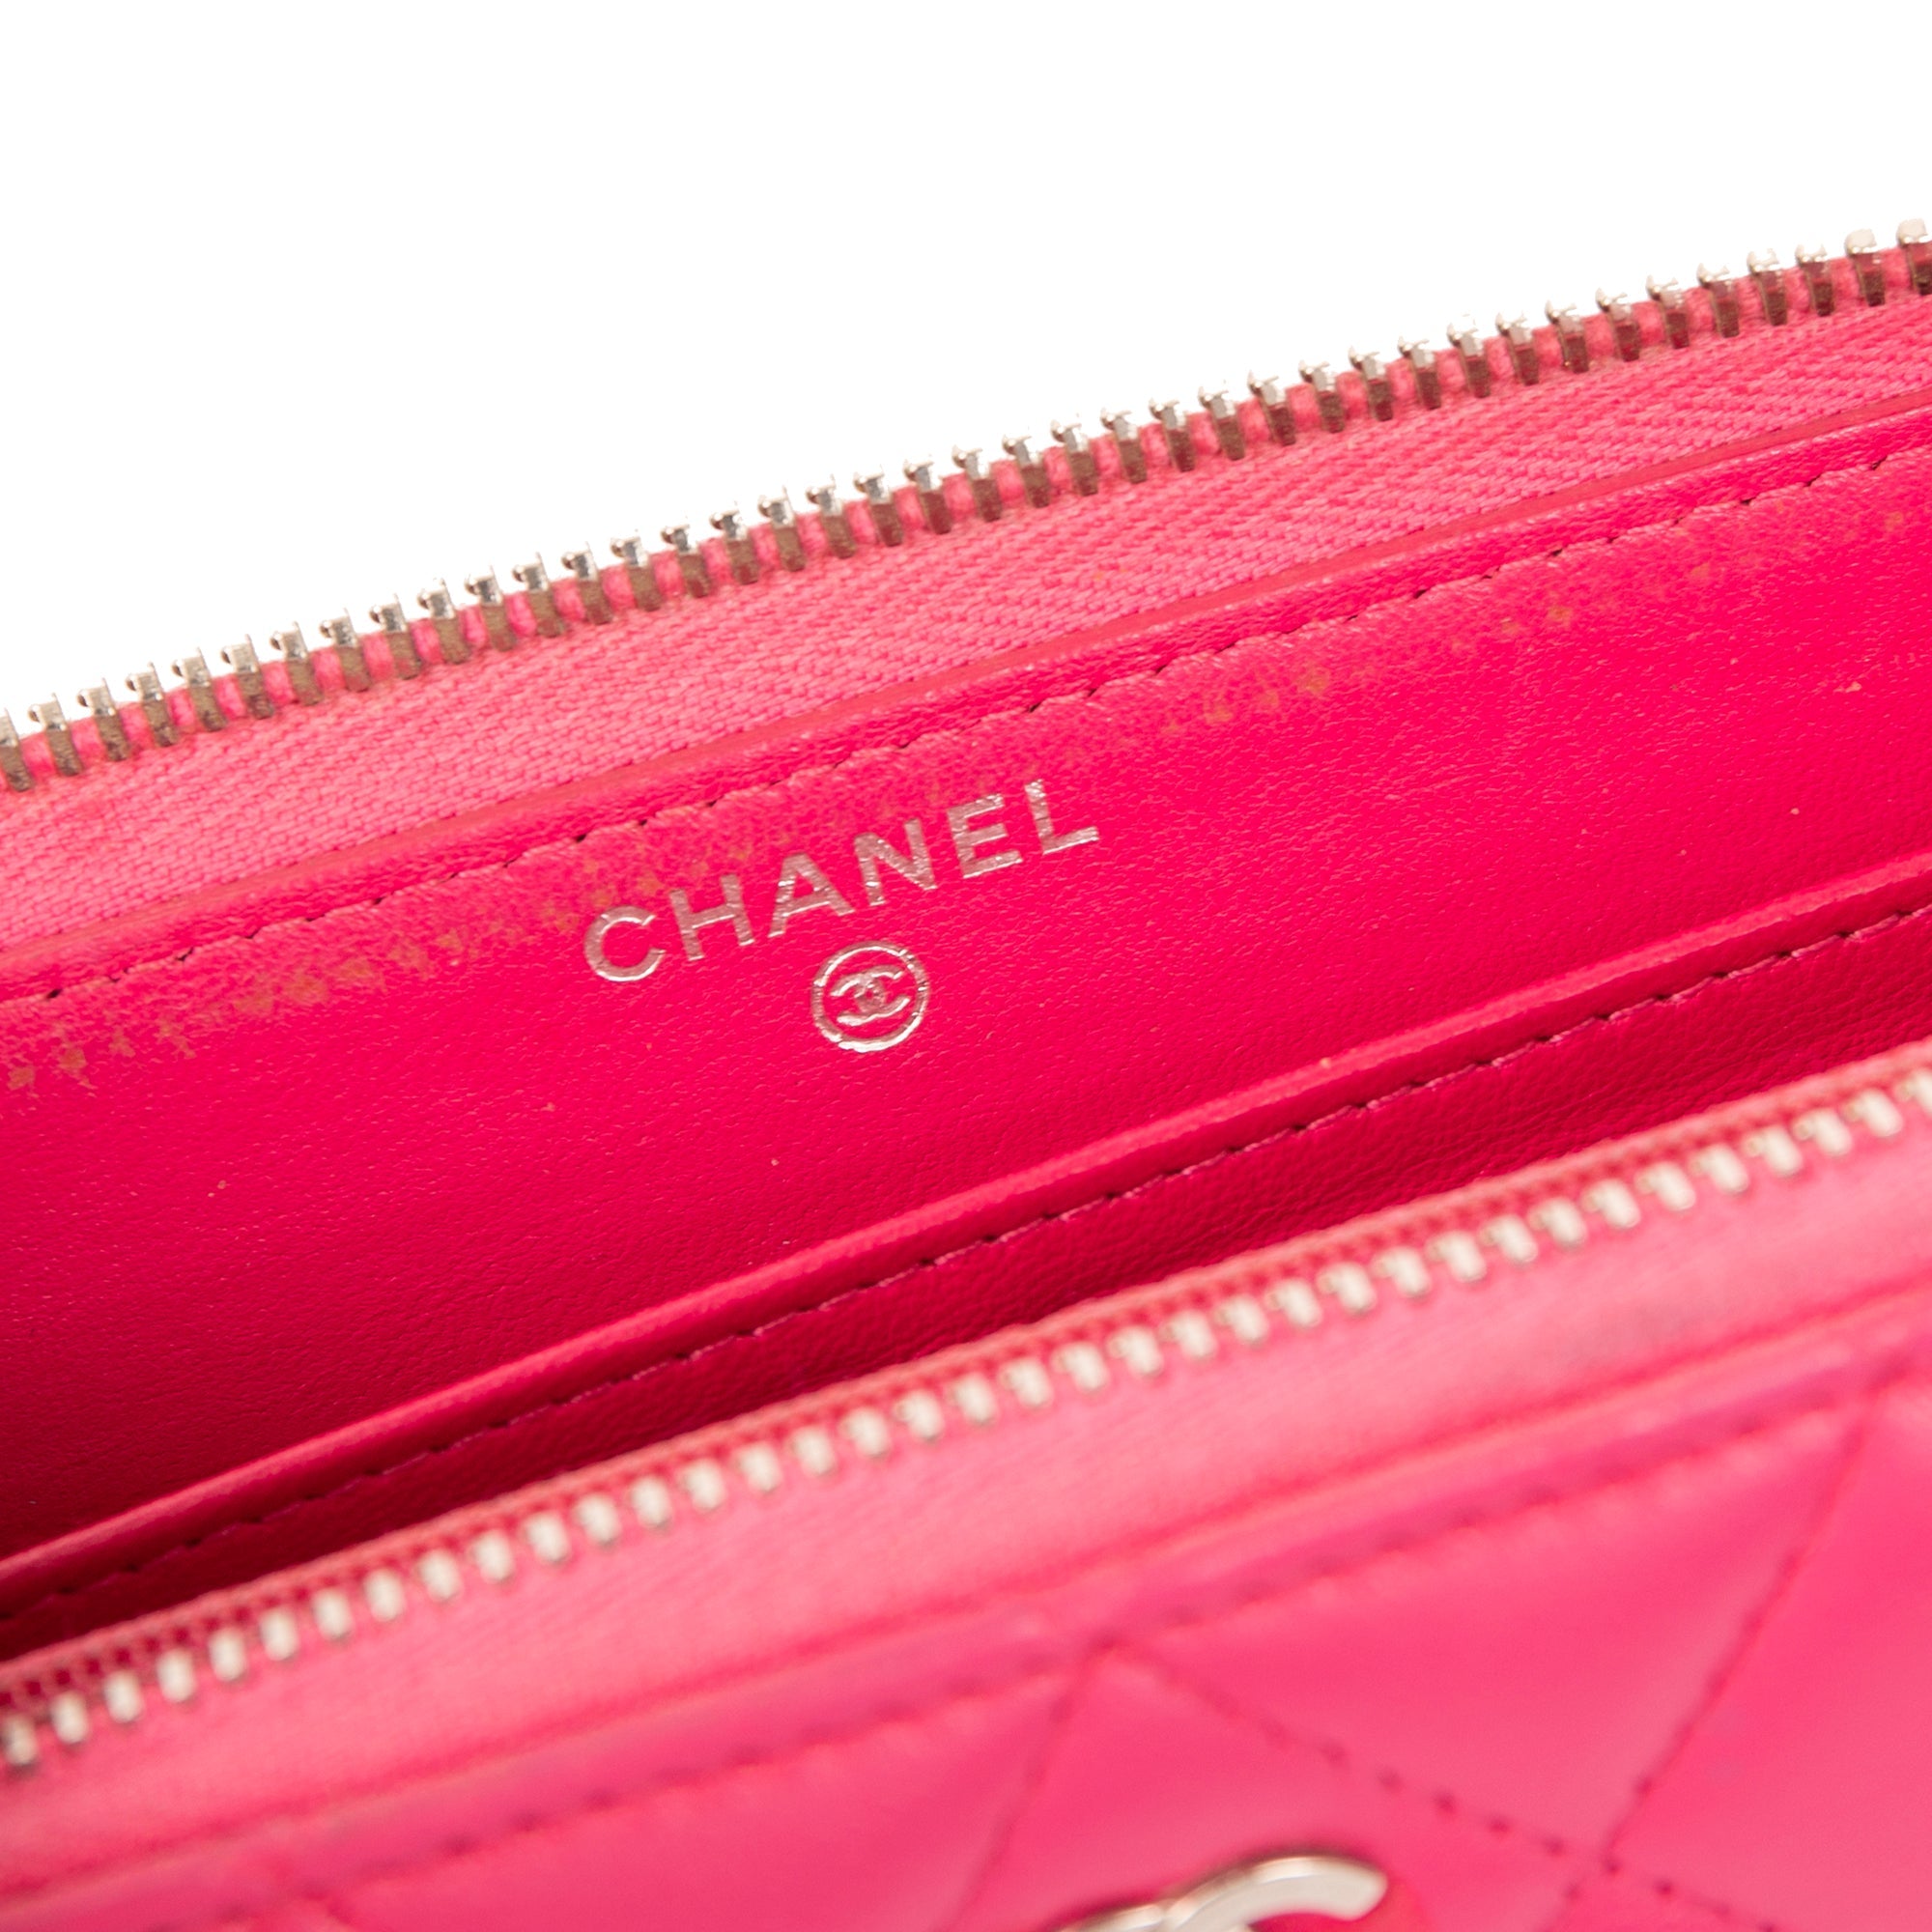 Chanel Pink Lambskin Classic Long Zipped Wallet w/ Authenticity